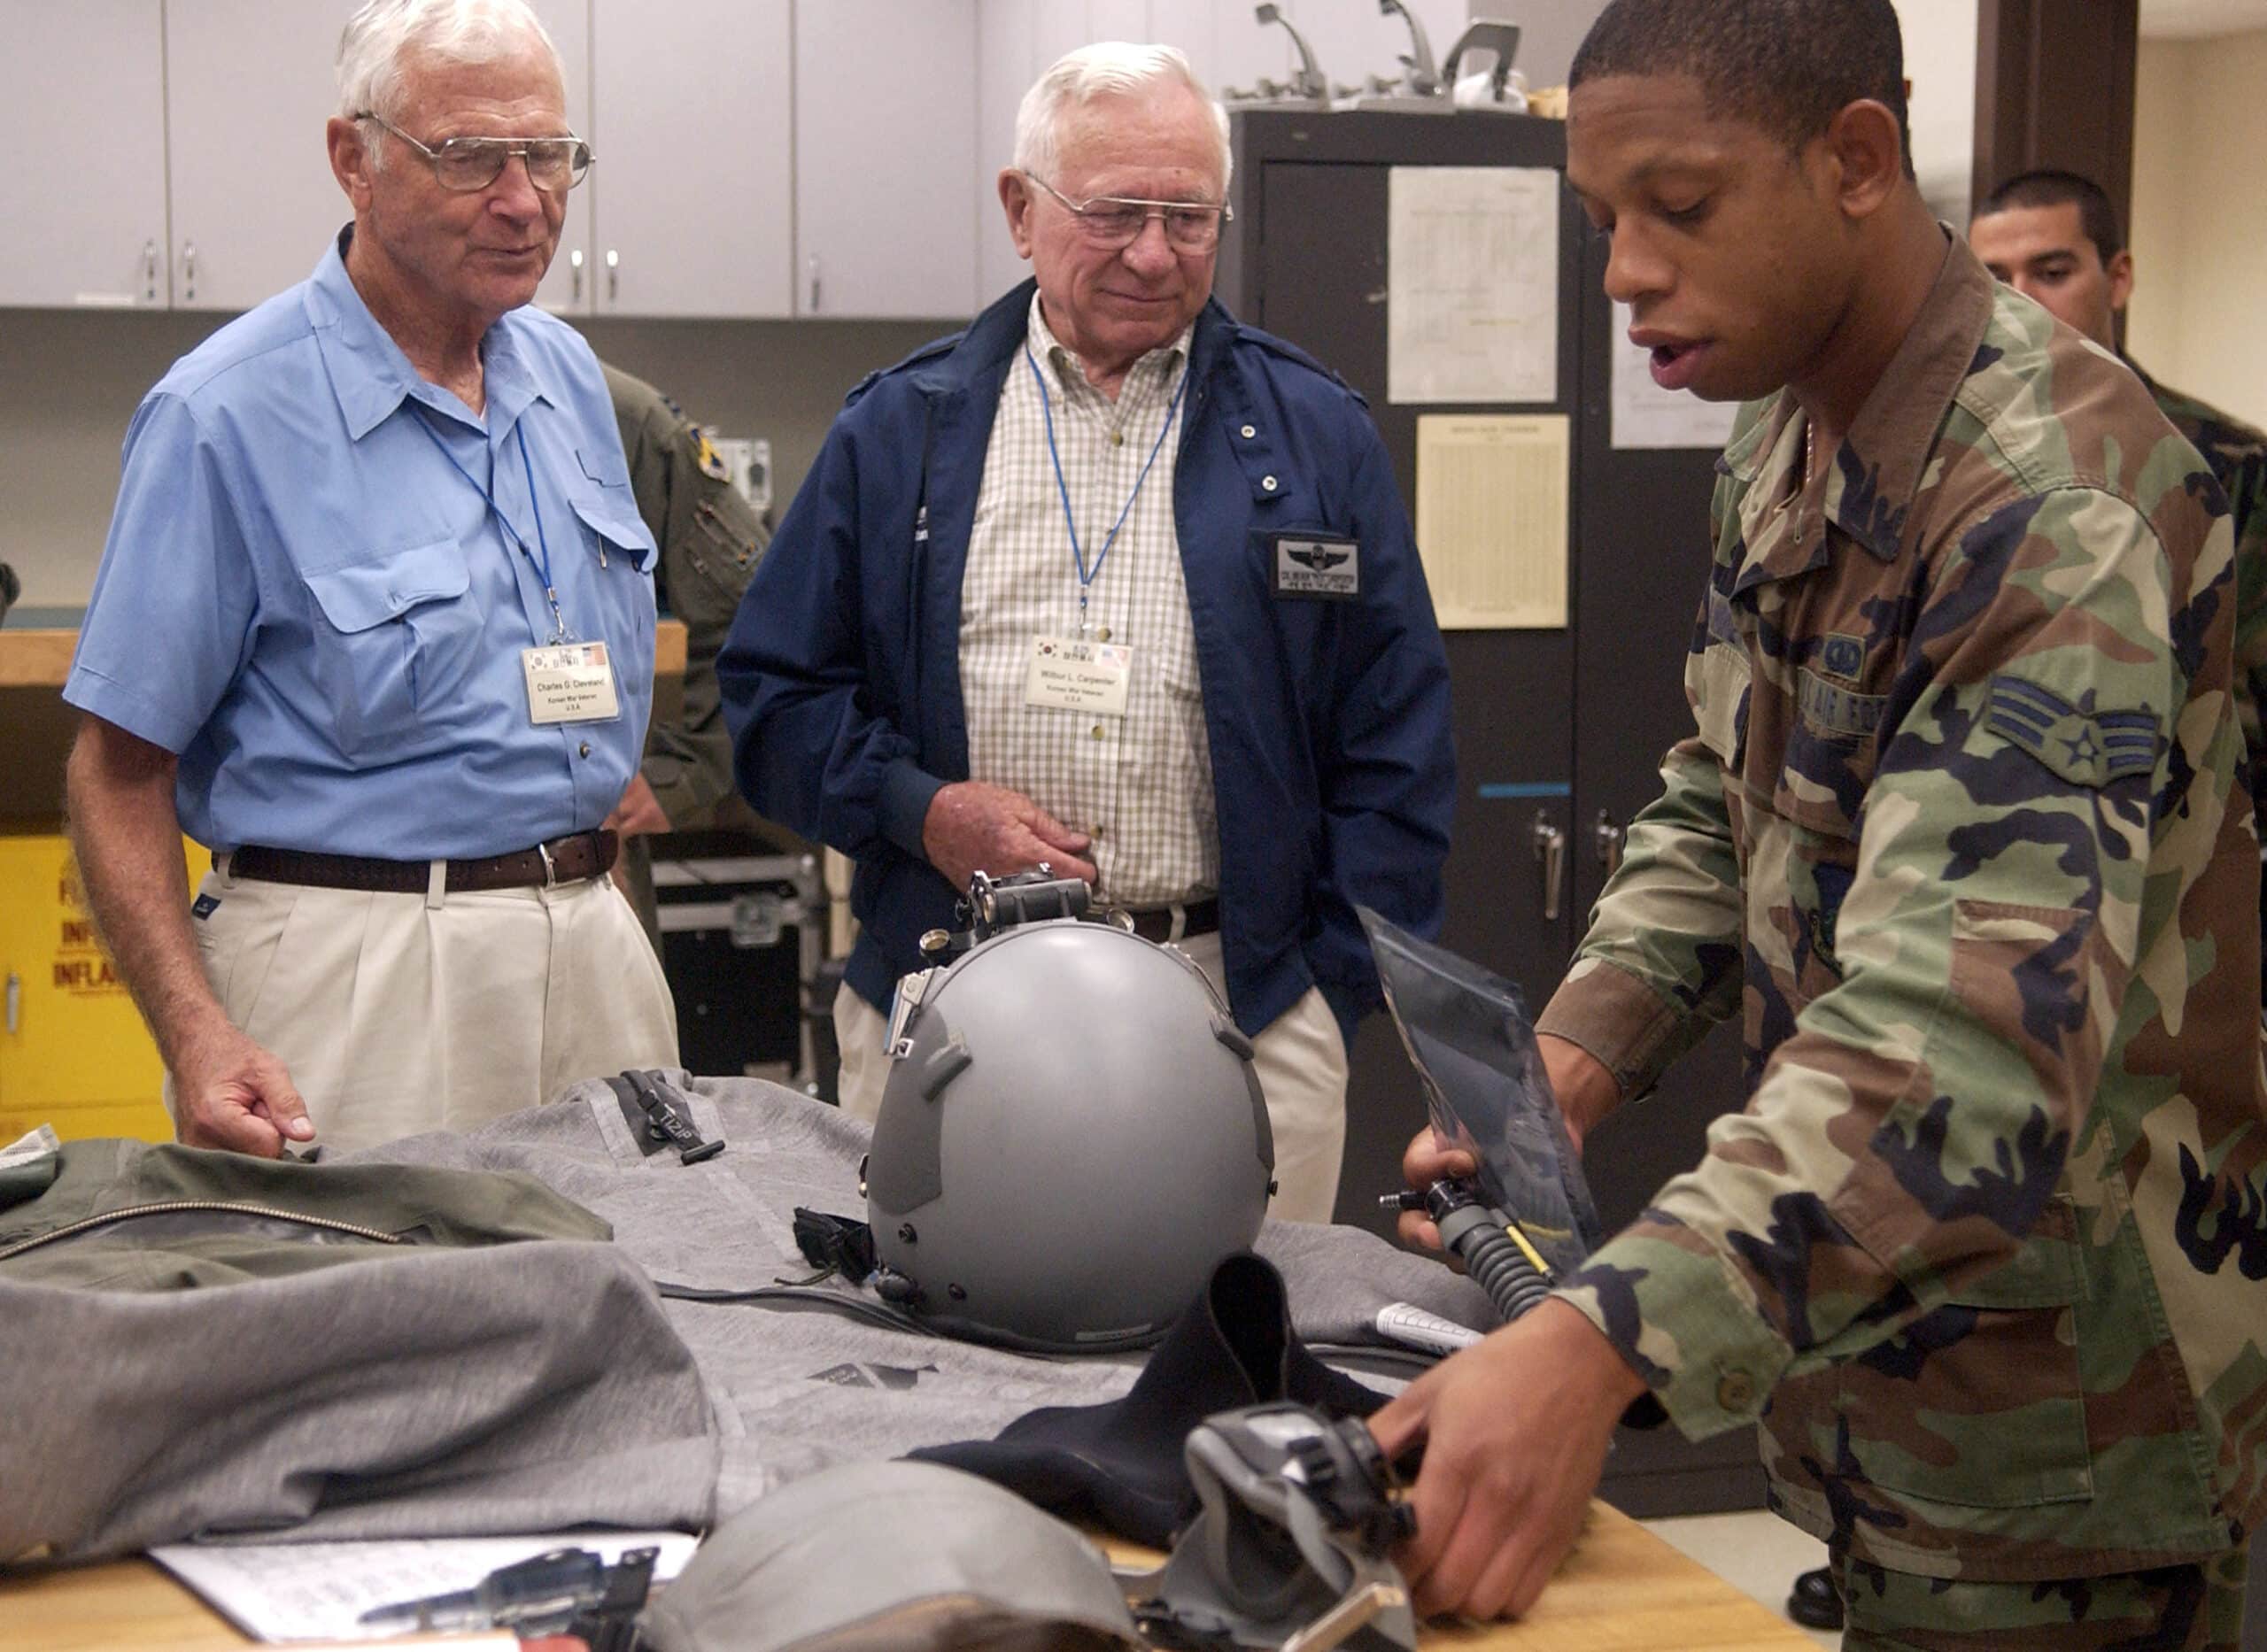 Senior Airman Cortney Tanner shows some of the life support equipment used by today's pilots to Korean War veterans Lt. Gen. Charles Cleveland (left) and Col. Wilbur Carpenter Sept. 11 at Kunsan Air Base, South Korea.  The veterans were visiting Kunsan and sharing their flying experiences with 8th Fighter Wing Airmen.  Airman Tanner is a life support journeyman with the 35th Fighter Squadron.  (U.S. Air Force photo/Senior Airman Giang Nguyen)